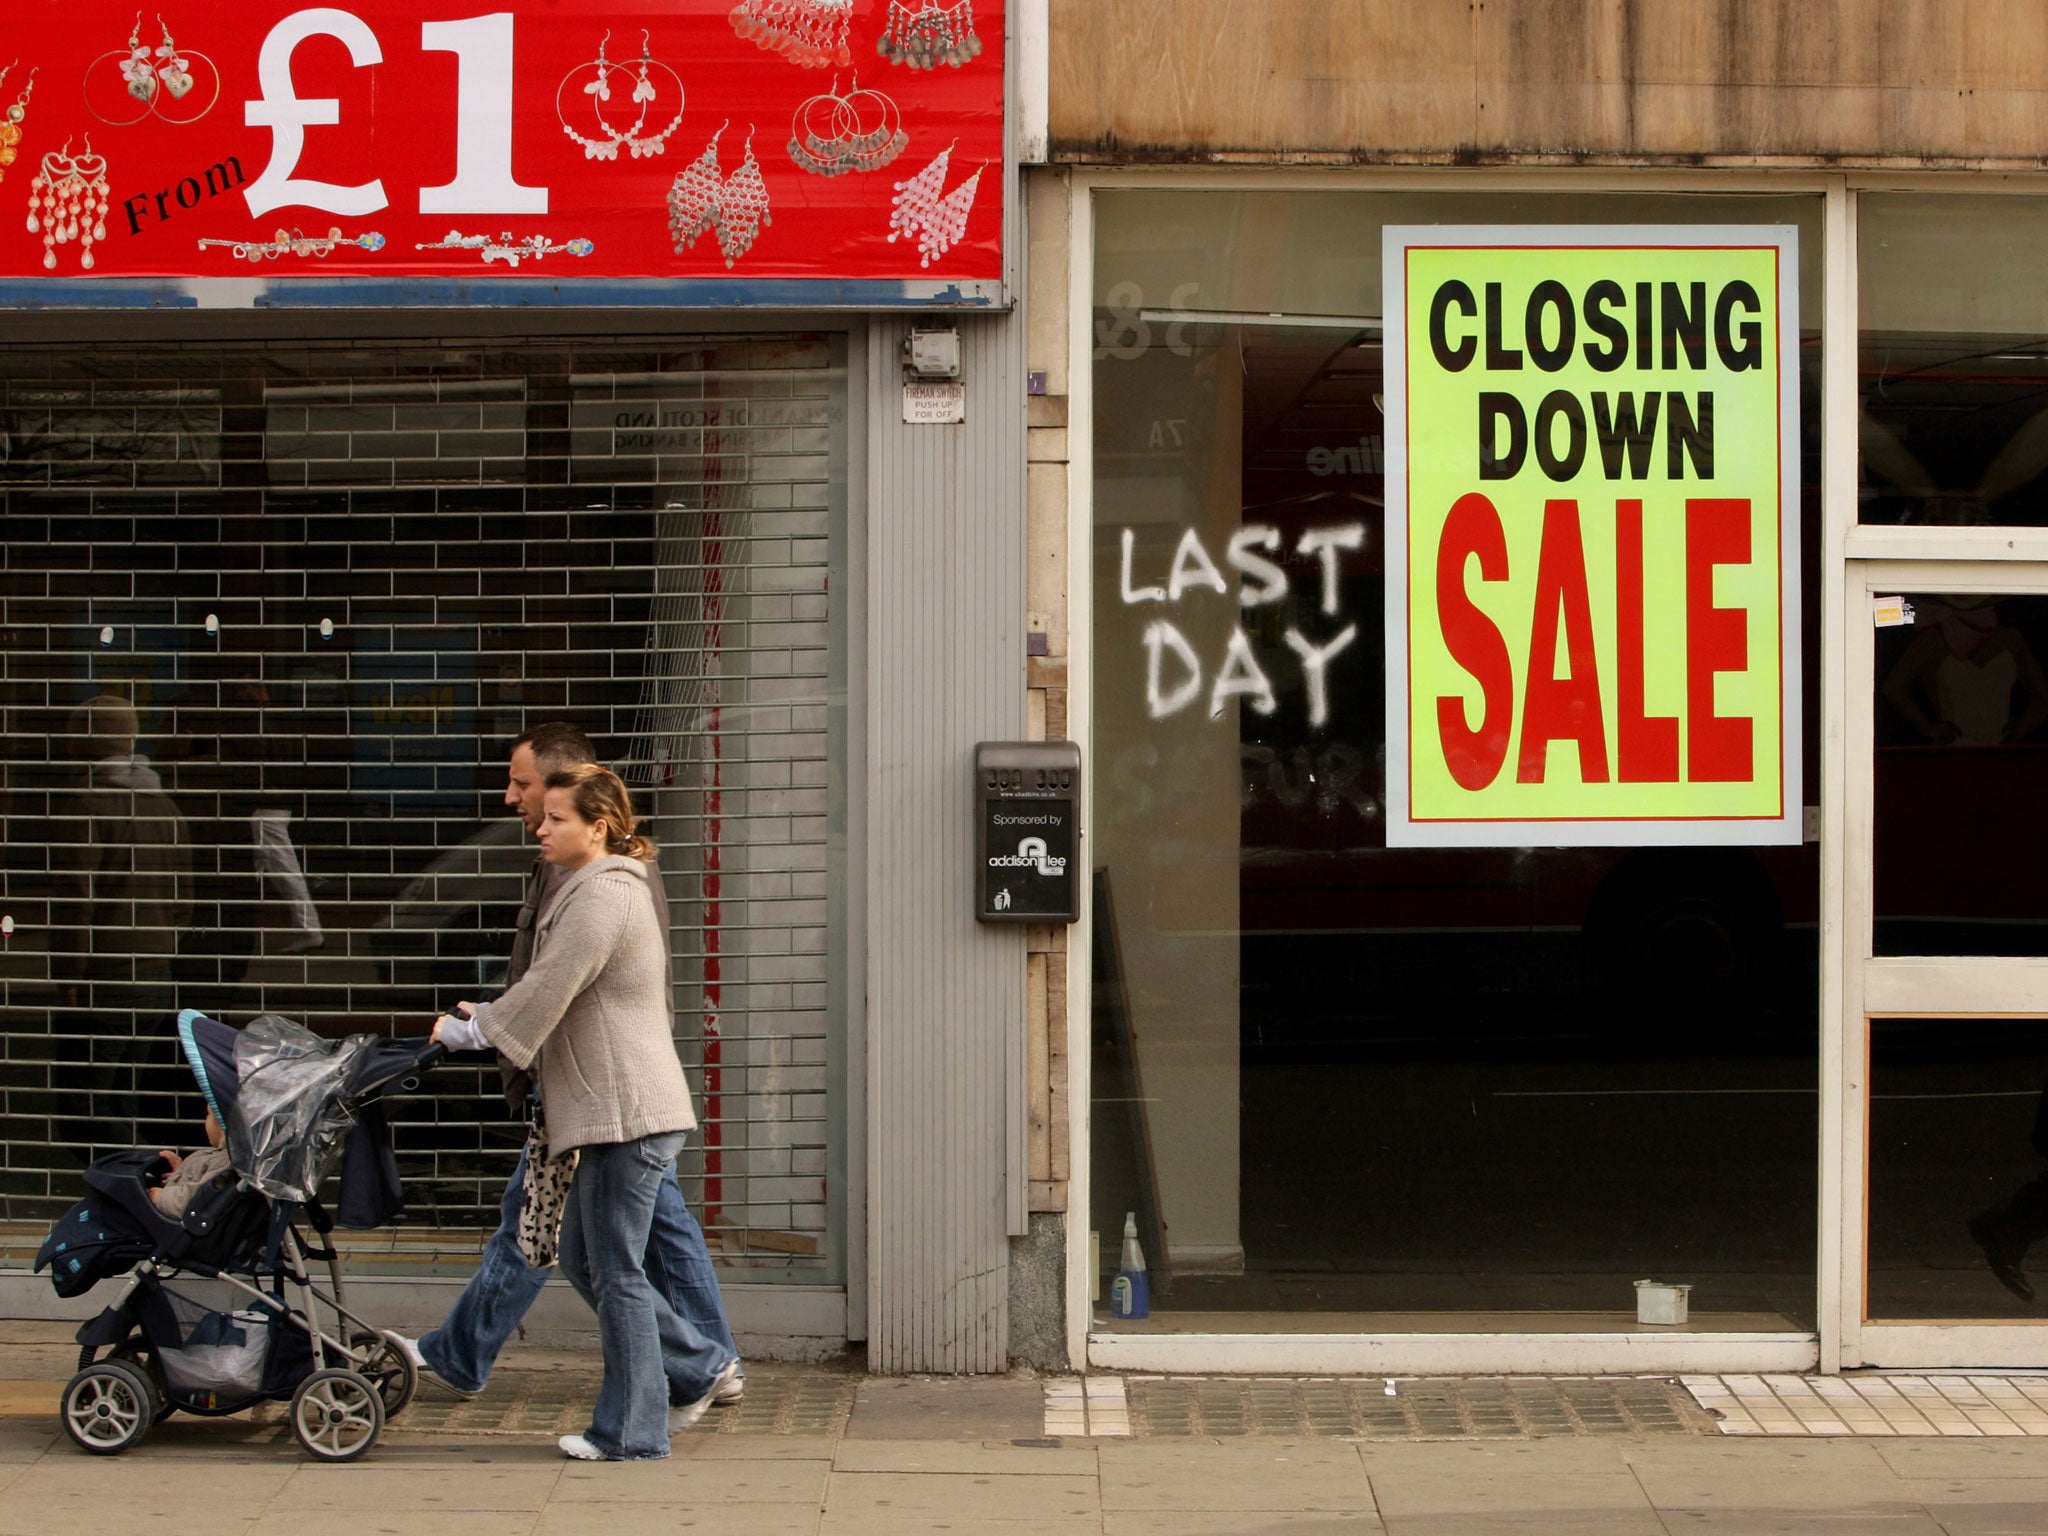 Members of the public walk past shops on Kilburn High Road on March 13, 2009 in London, England. The UK recession is seeing an increasing number of high street store closures, with many well established brands unable to survive the downturn.